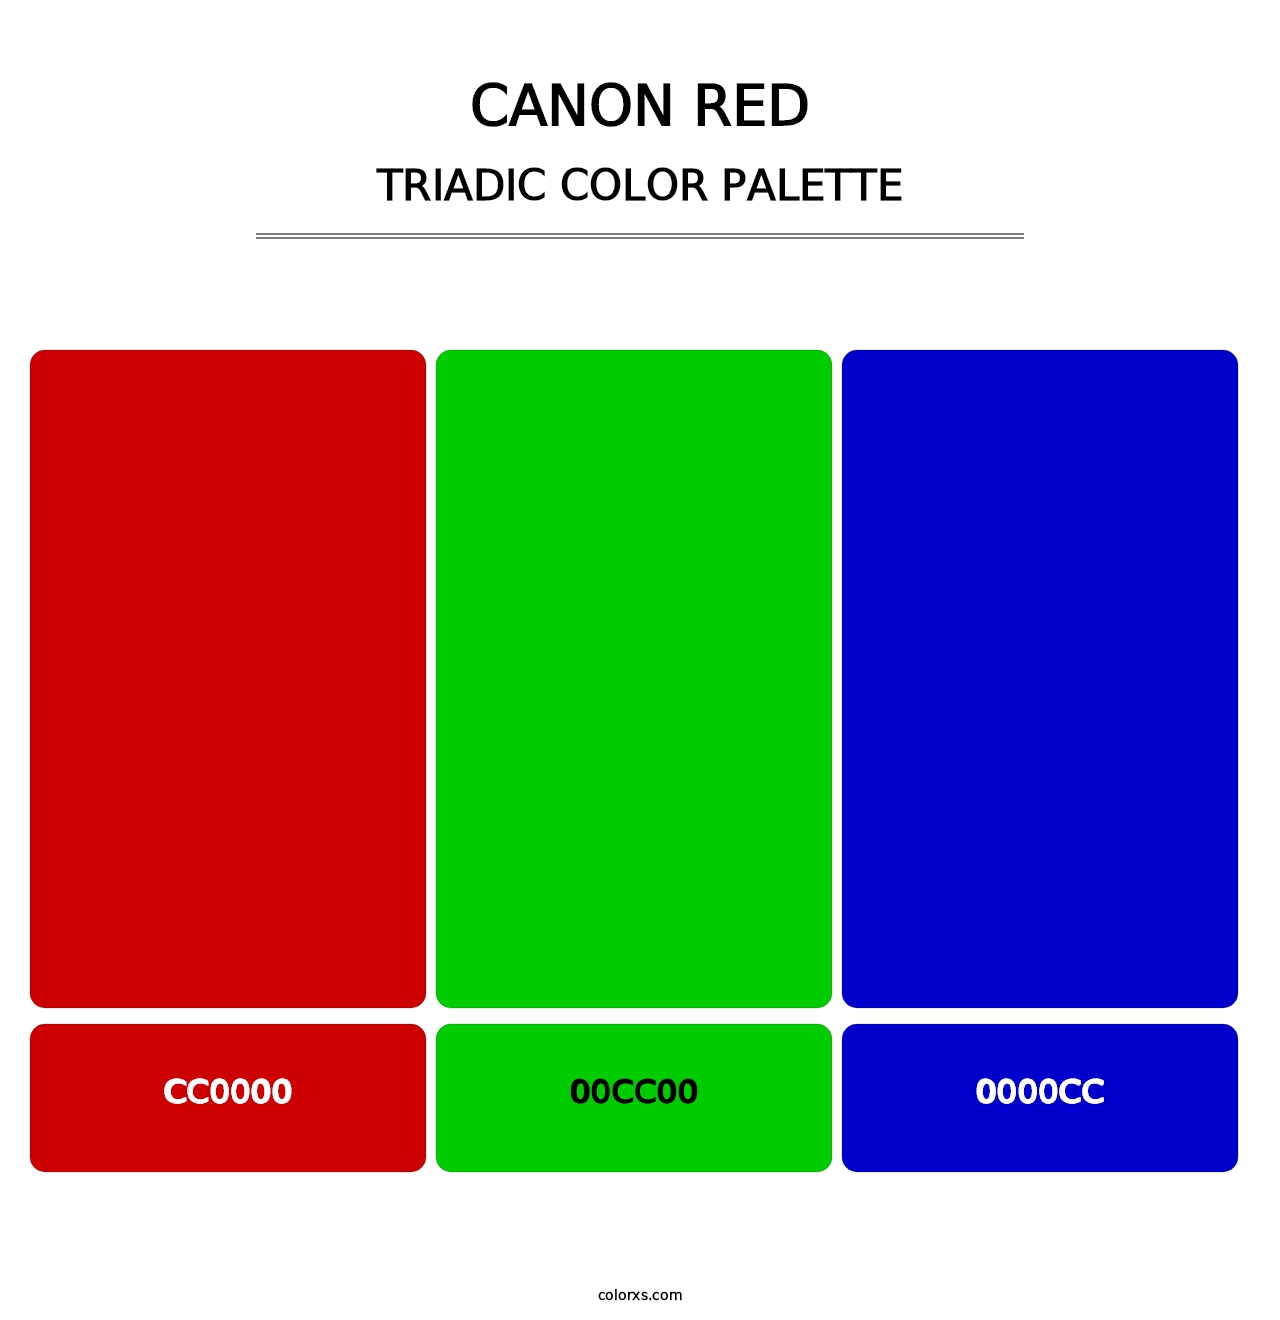 Canon Red - Triadic Color Palette